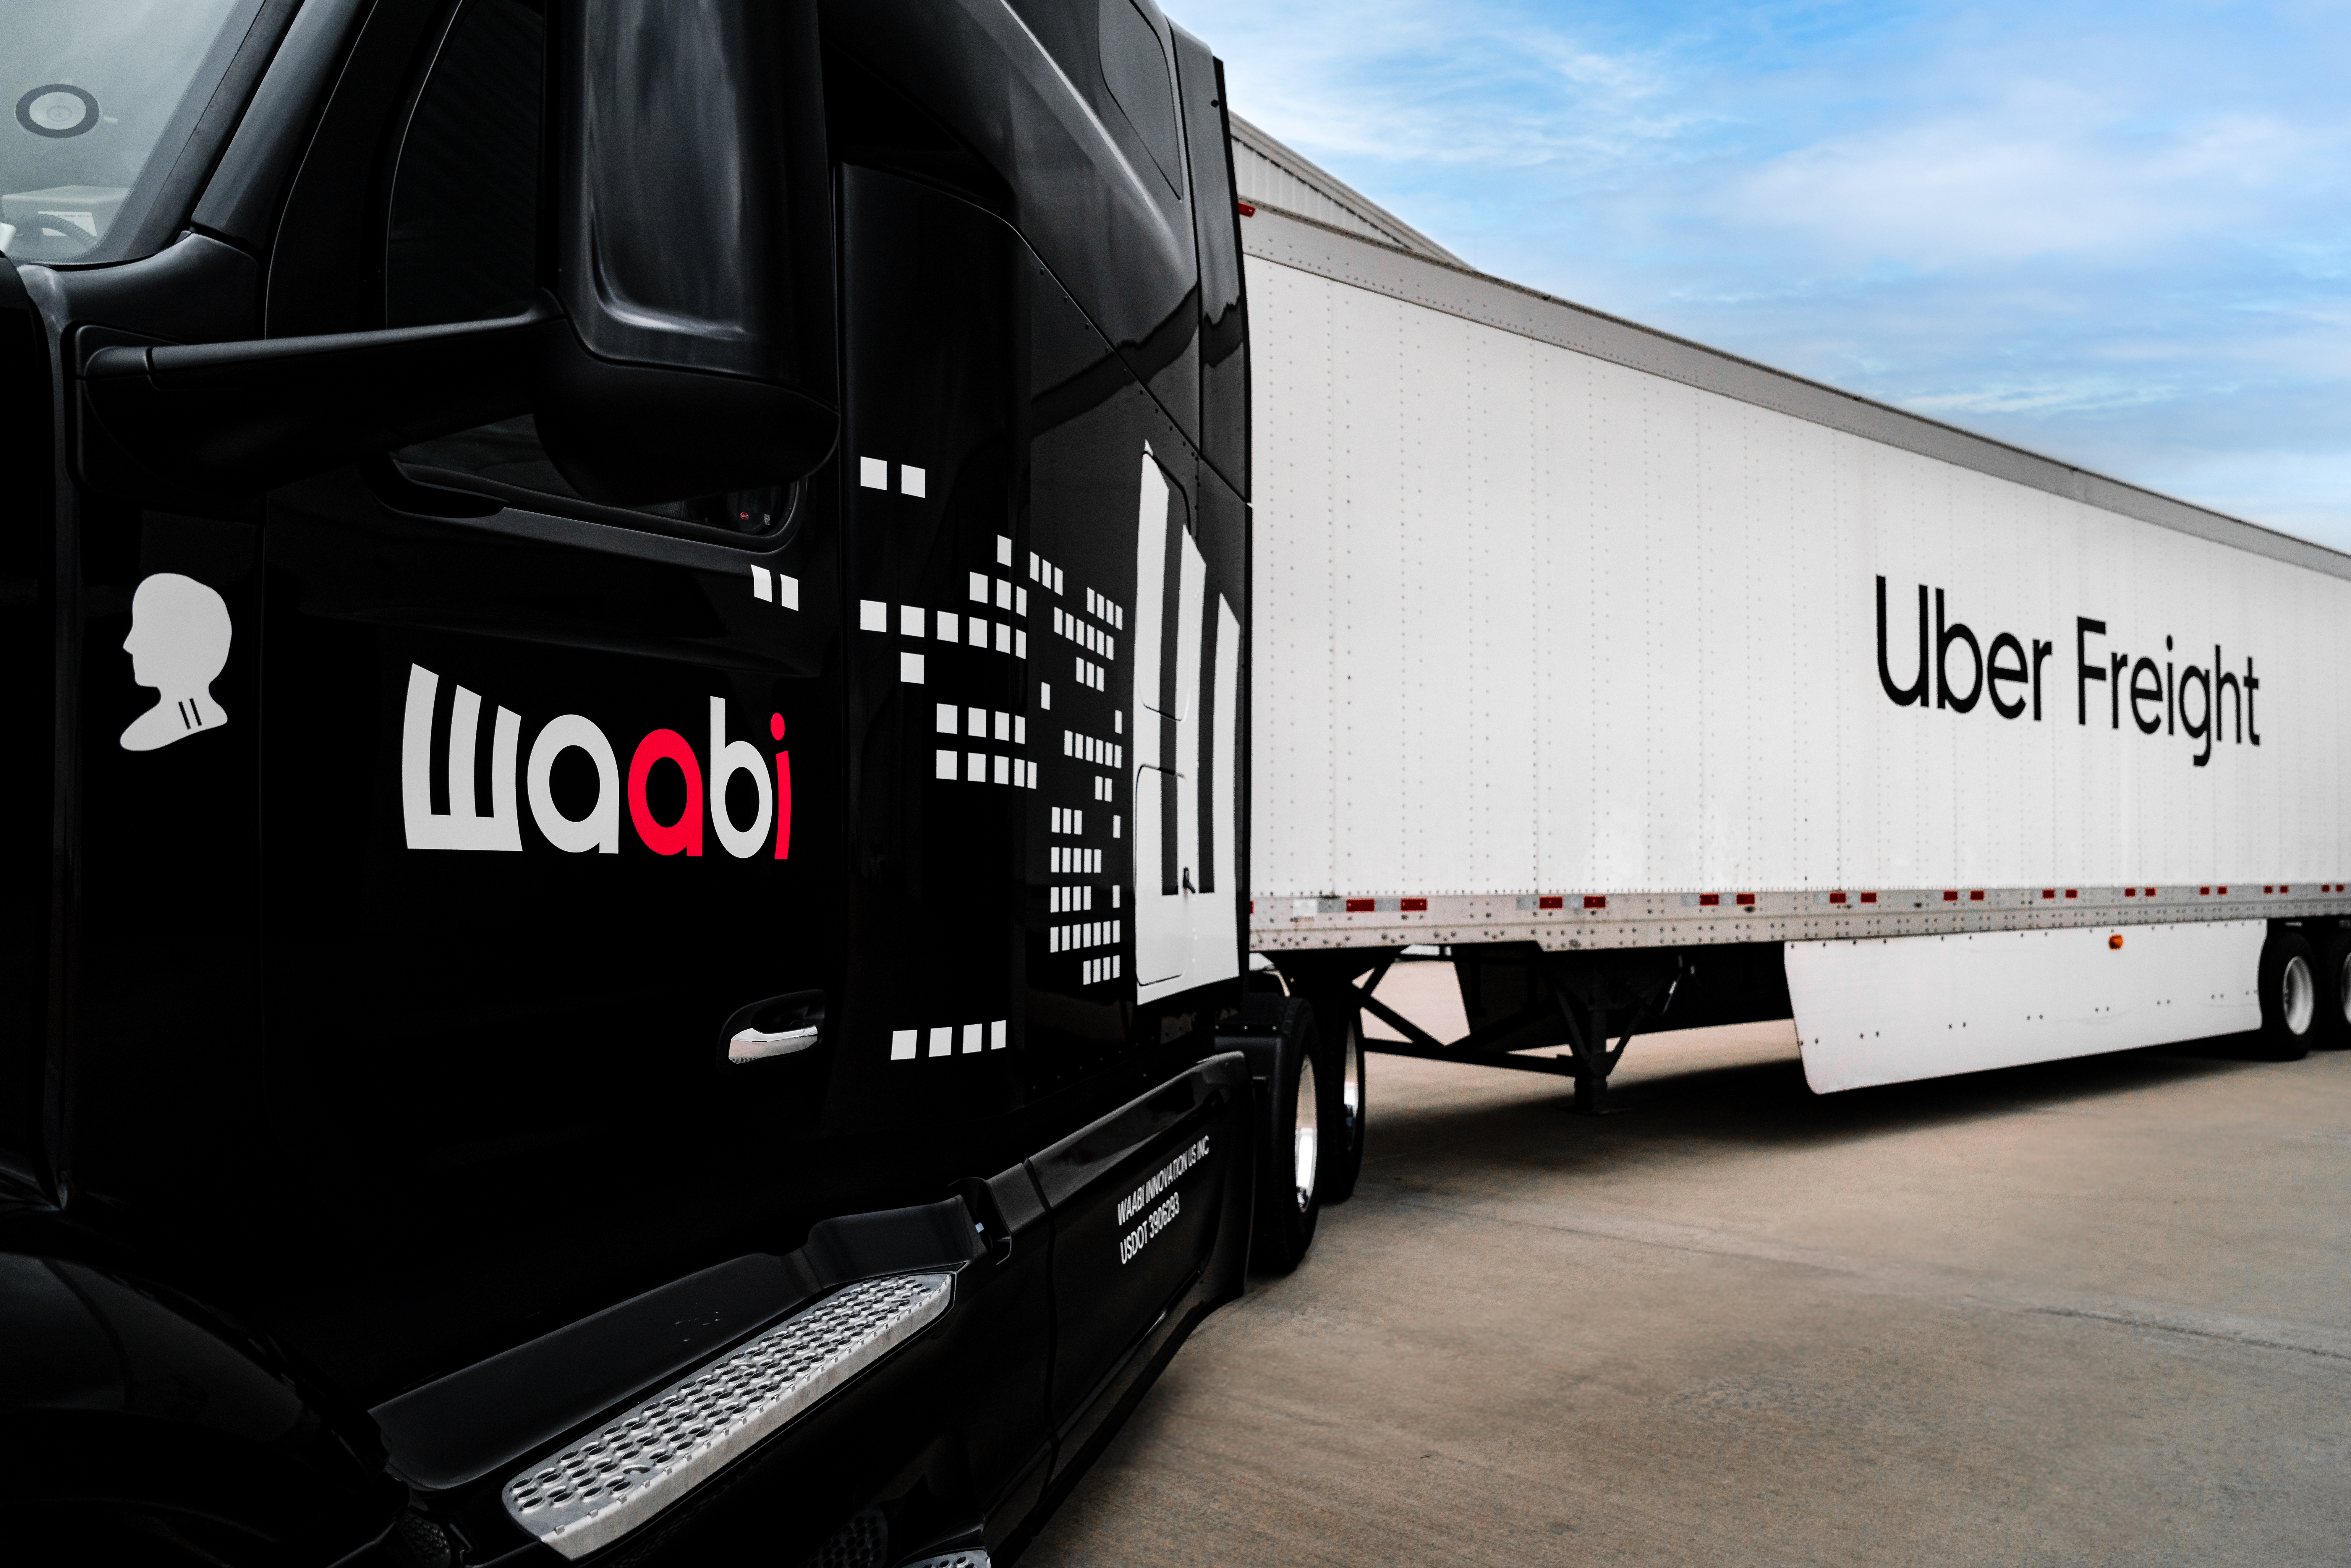 Partnering with Uber Freight to build an industry-first solution for AI-powered autonomous truck deployment at scale